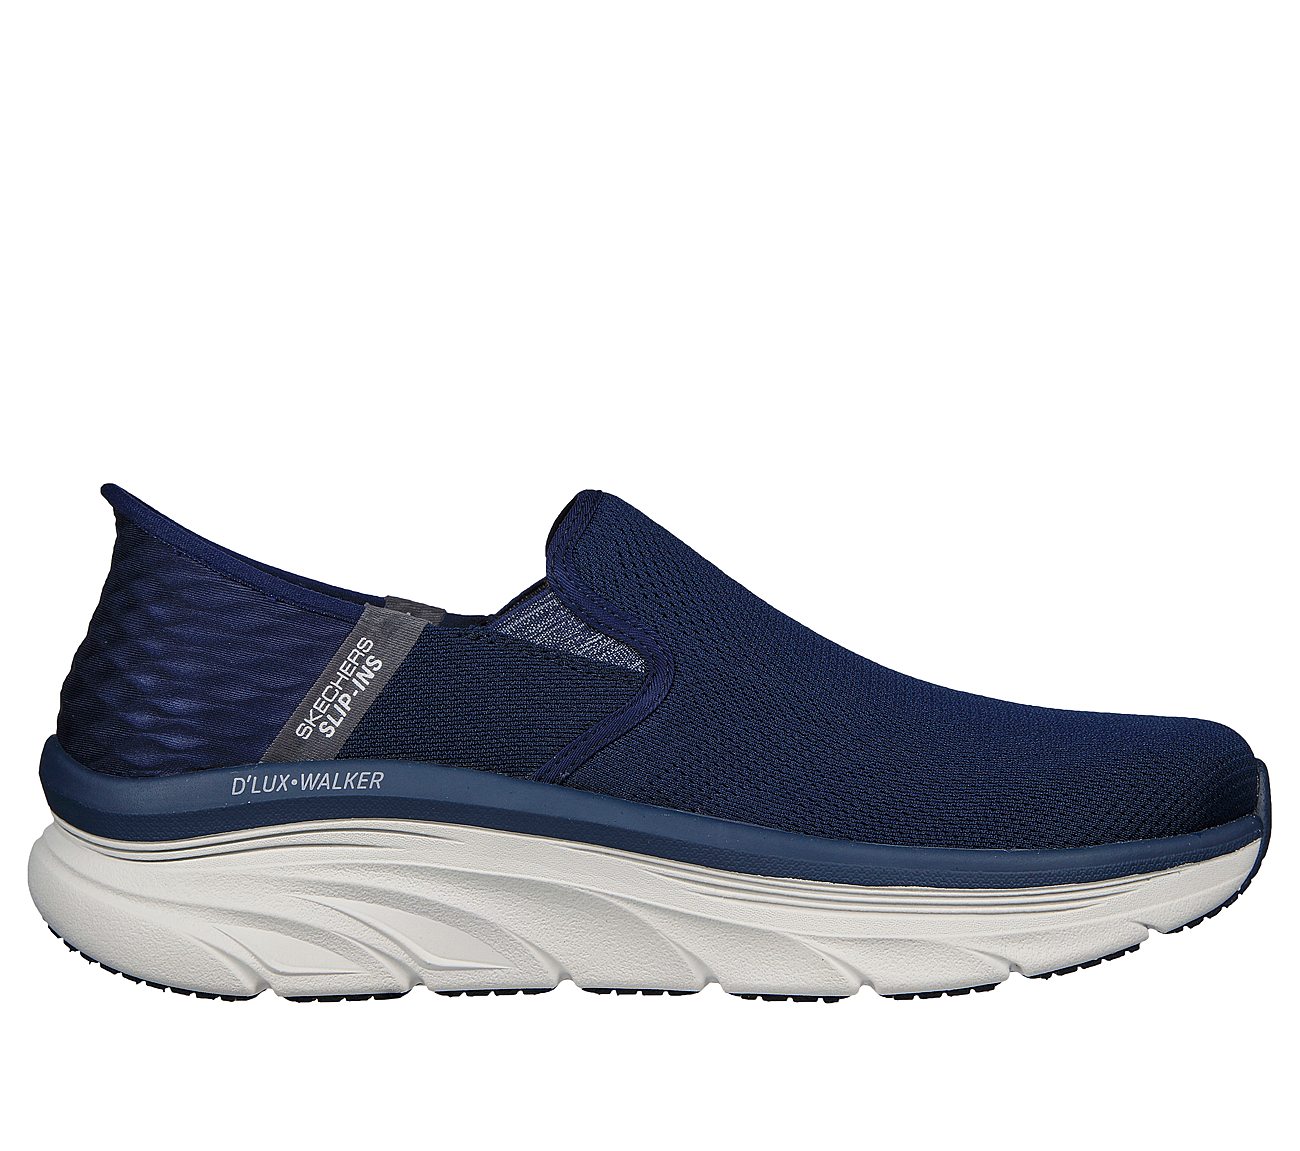 D'LUX WALKER - ORFORD, NNNAVY Footwear Lateral View